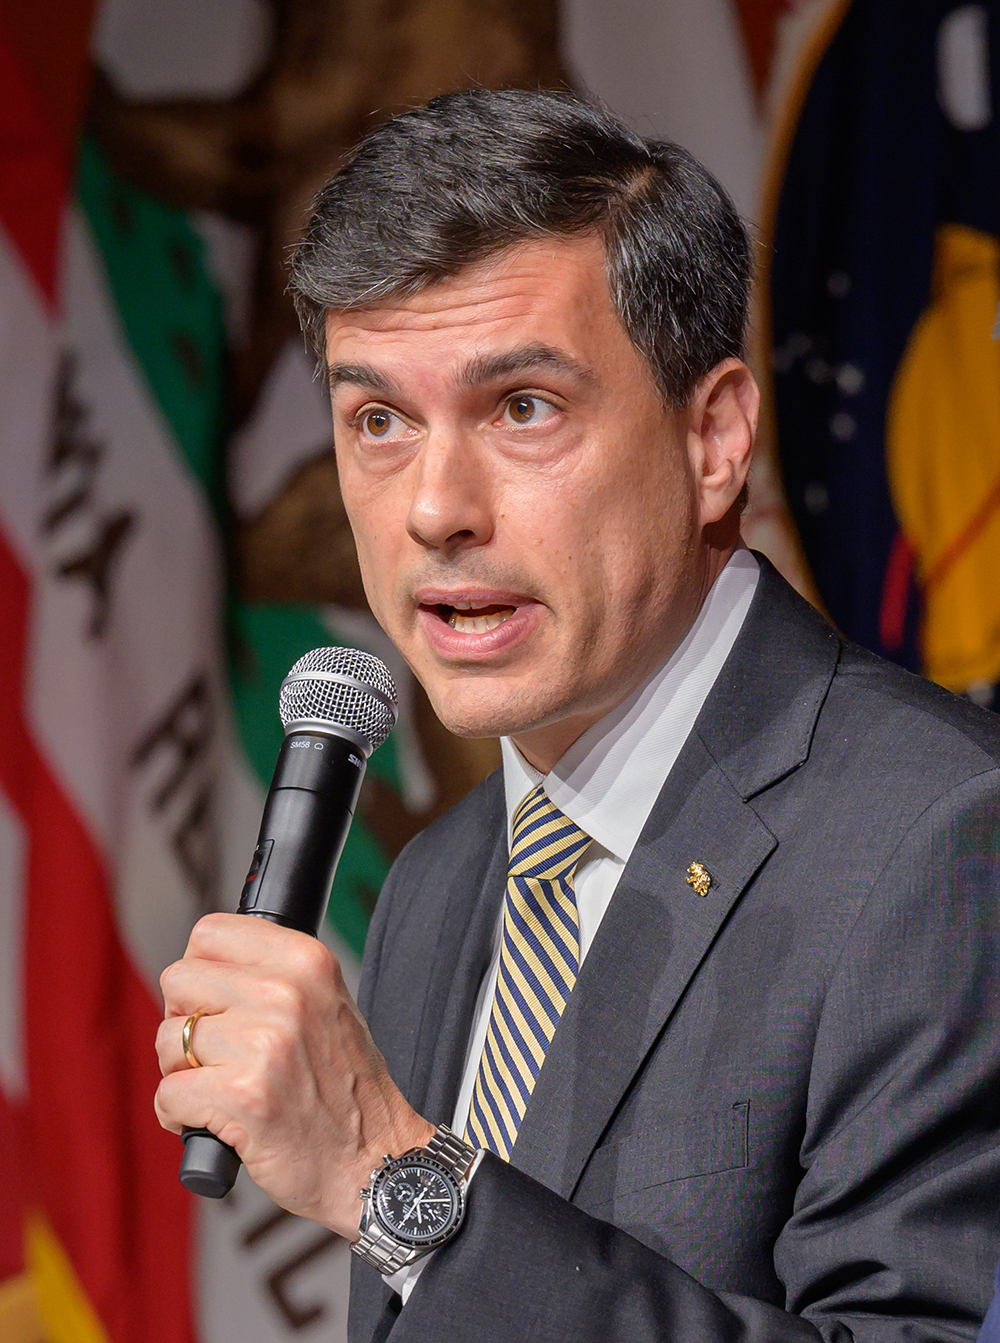 man in suit holding microphone, California flag in background